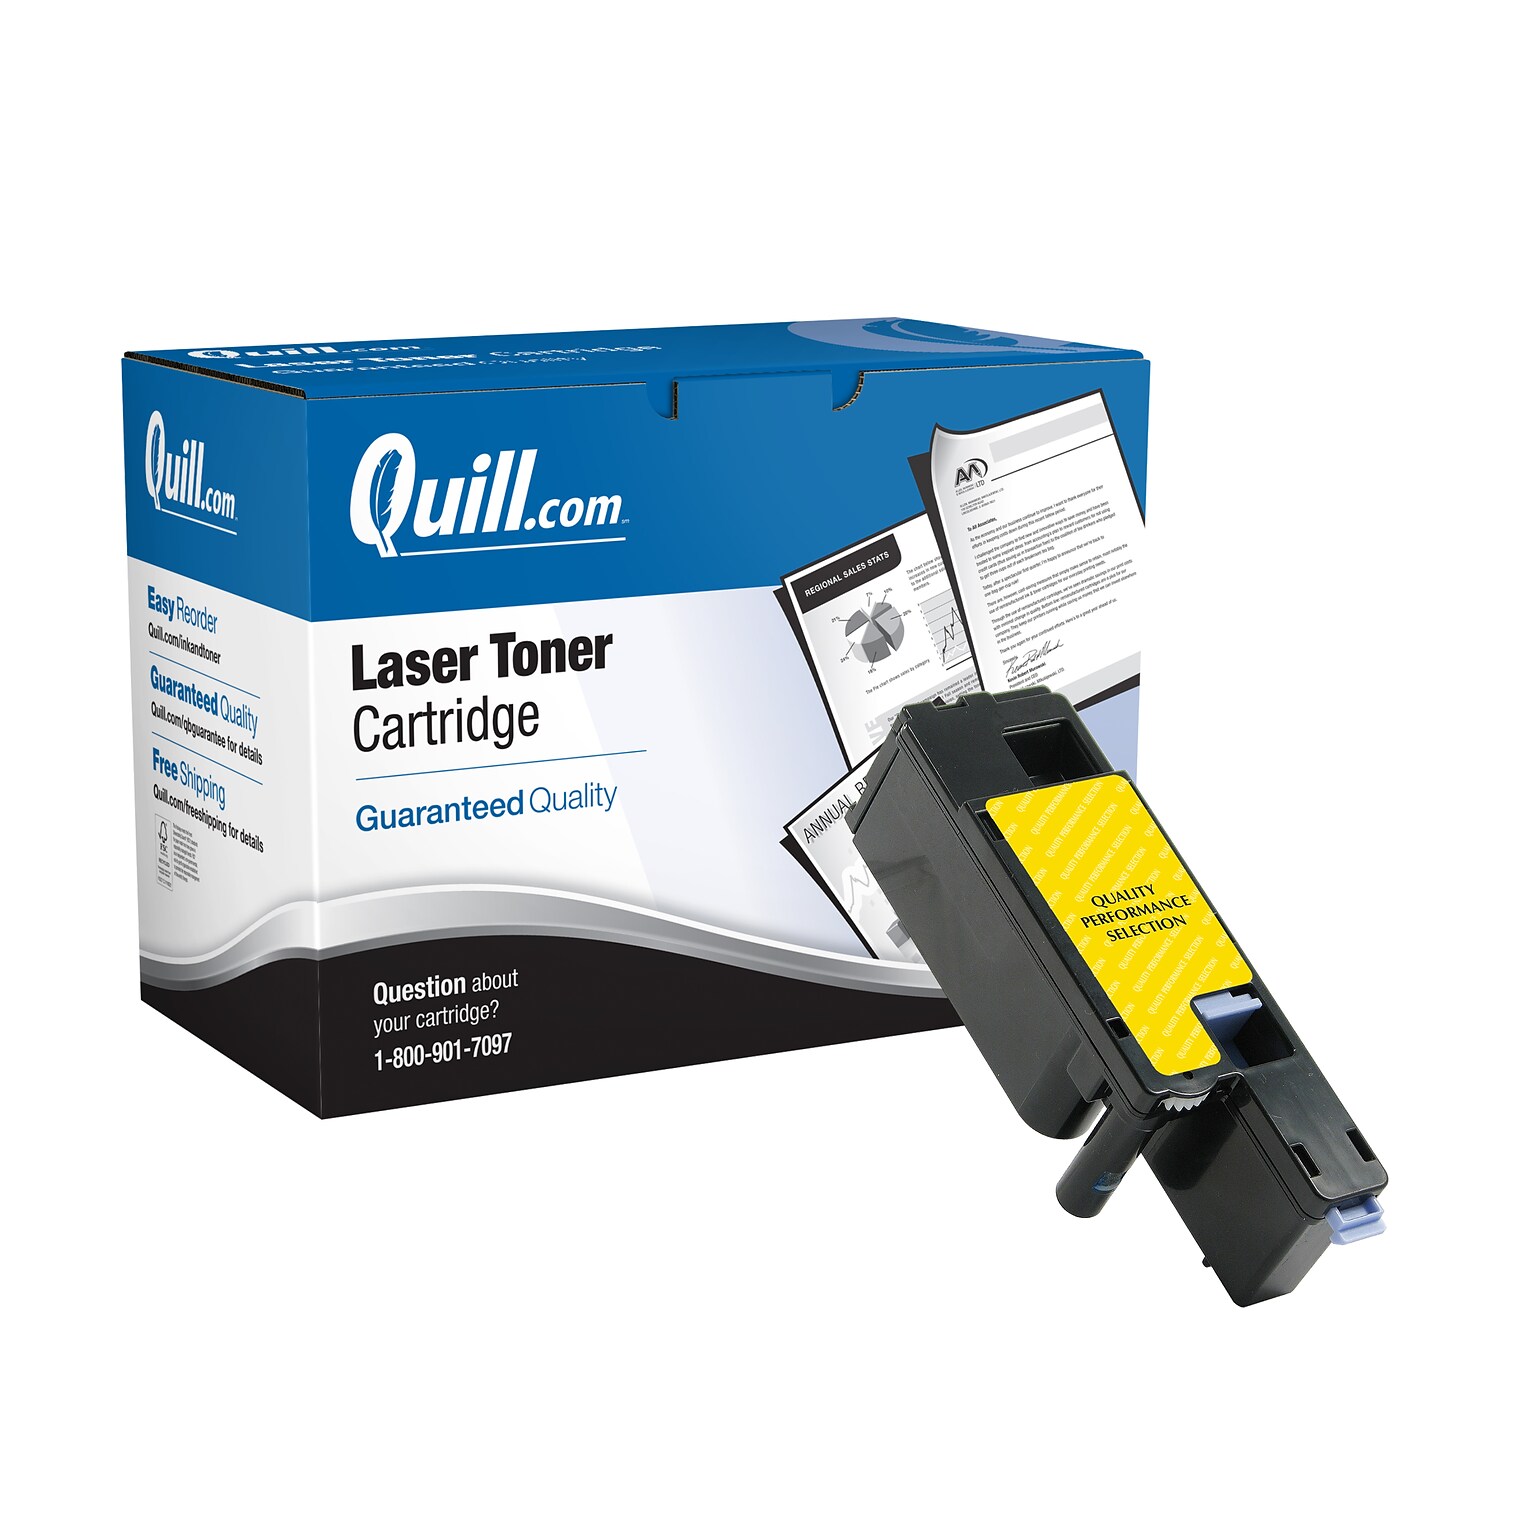 Quill Brand® Remanufactured Yellow High Yield Toner Cartridge Replacement for Dell 1250/1350/1355/C1760/C1765 (DG1TR)